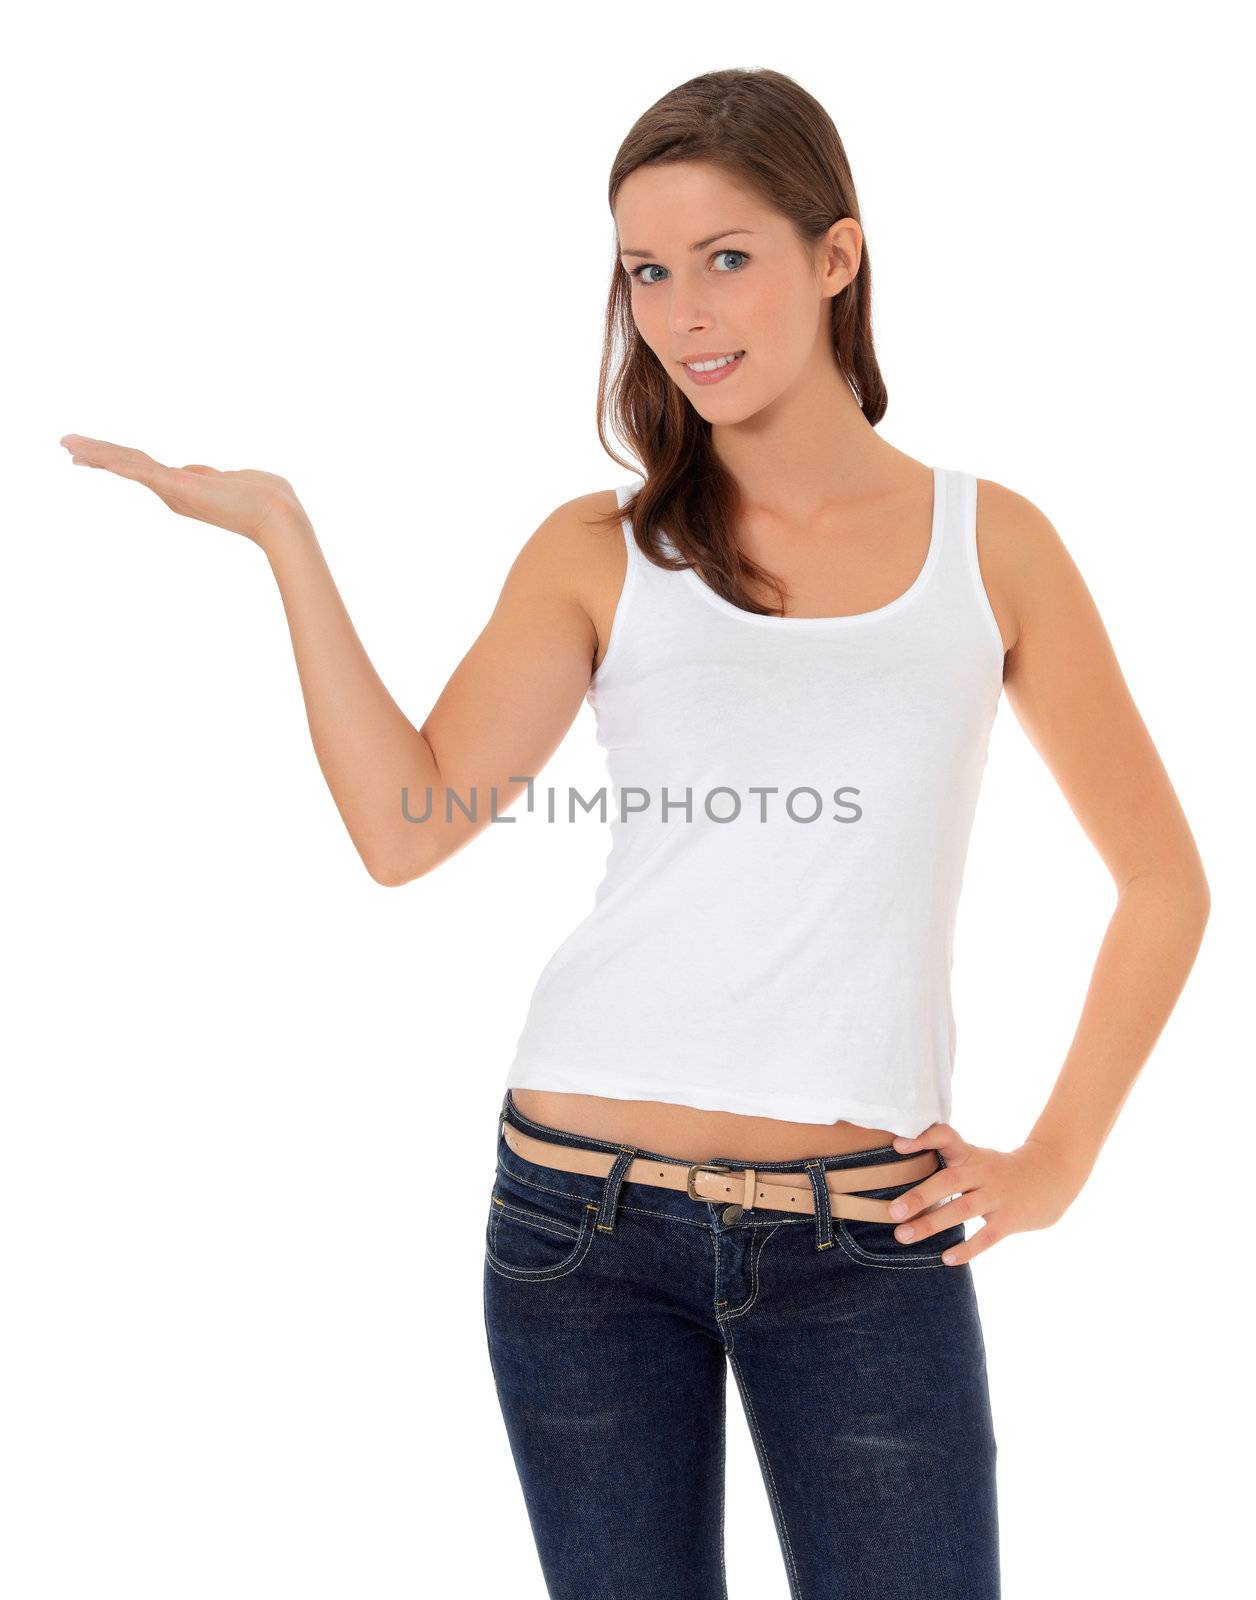 Attractive young woman pointing to the side. All on white background.